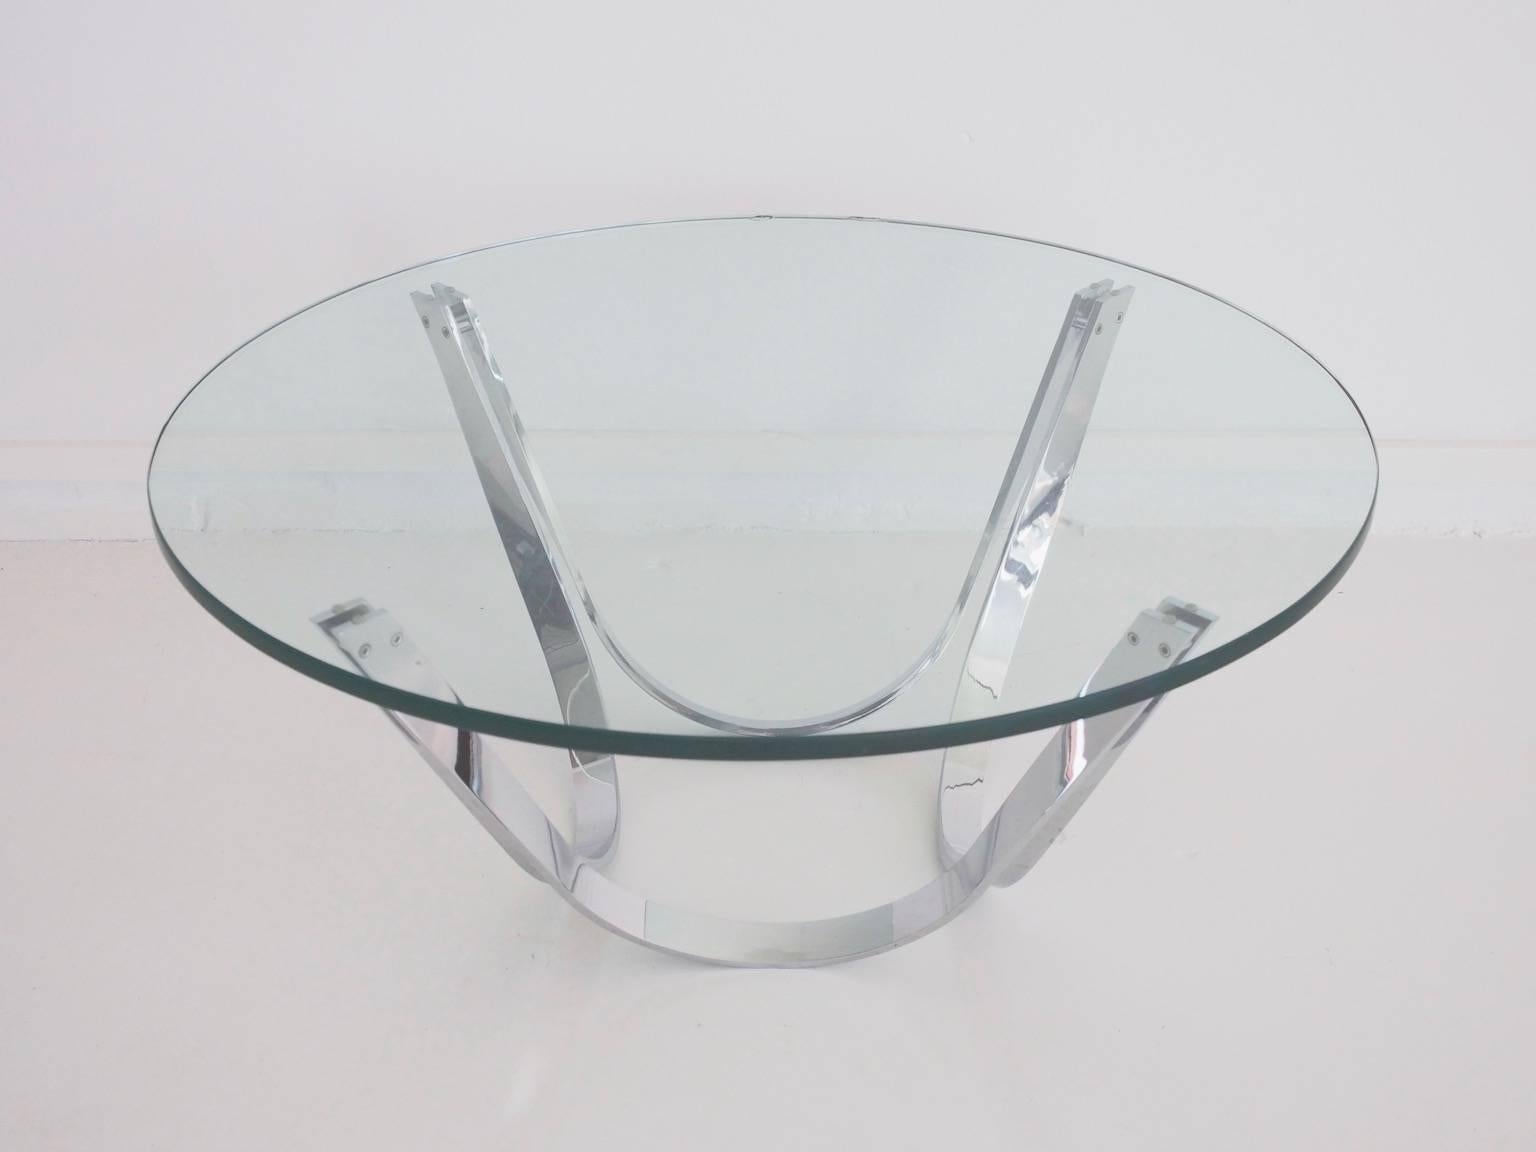 Round coffee table from the 1970s. Produced by Tri-Mark Designs, USA. Chromed flattened steel frame and loose 2 cm thick crystal tabletop.